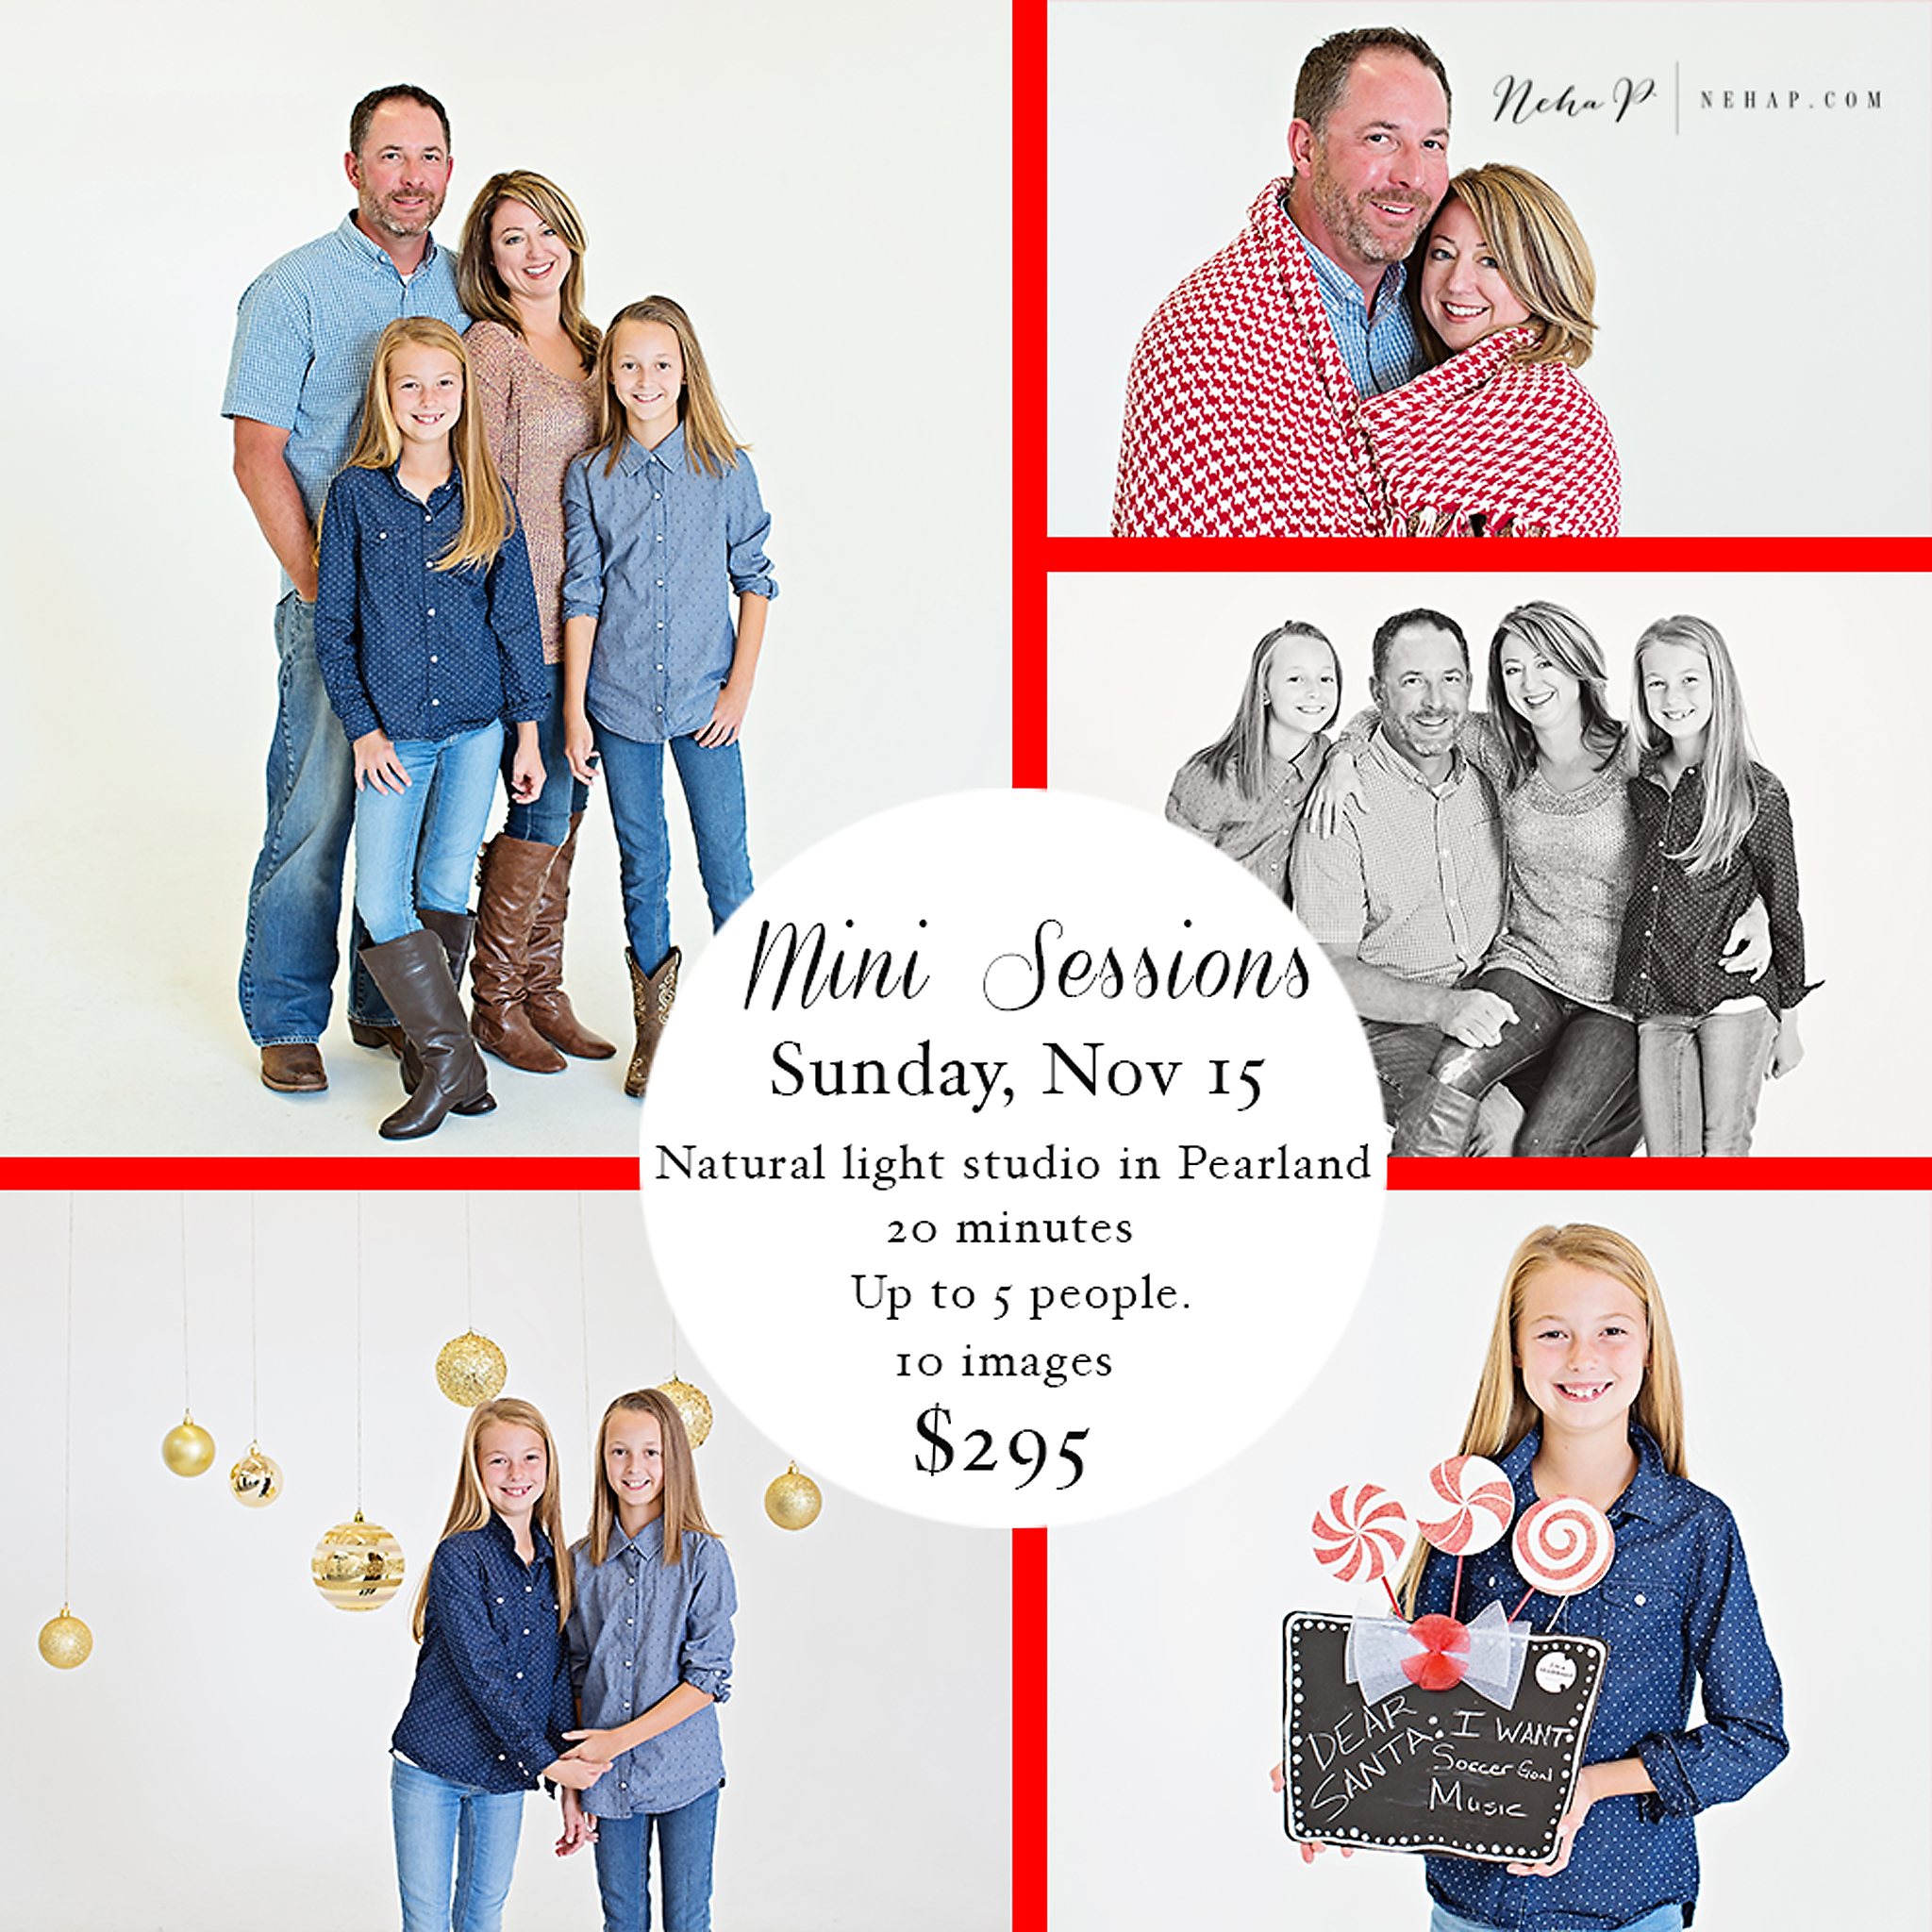 Pearland-Houston-Friendswood Mini Session Family - Kids